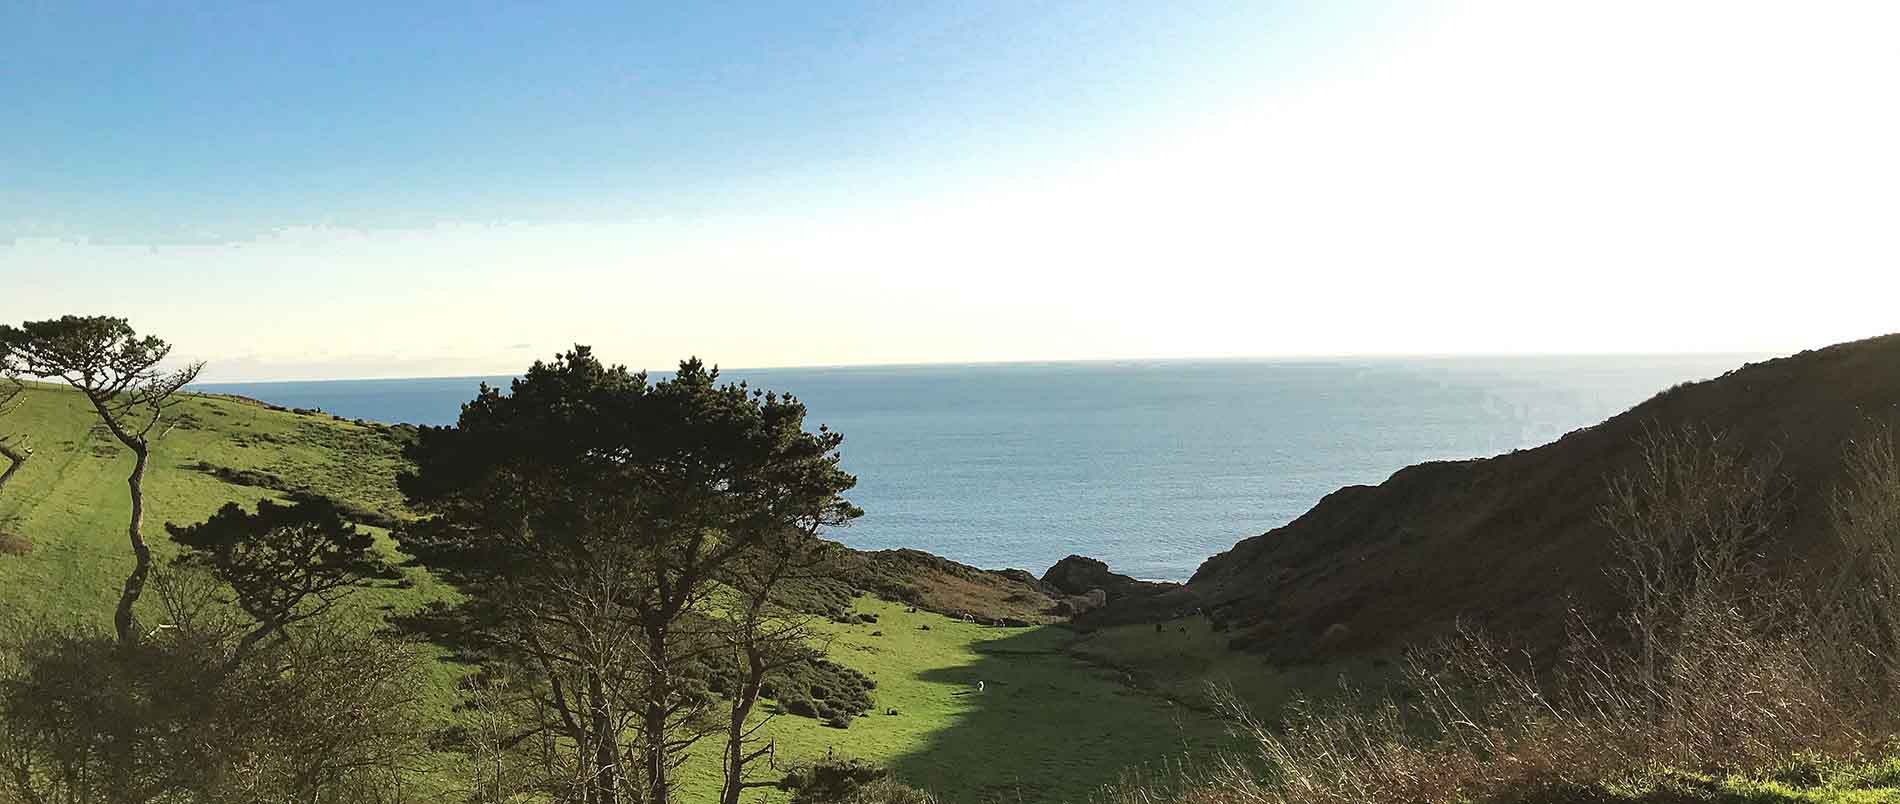 The view of the sea from Battisborough House